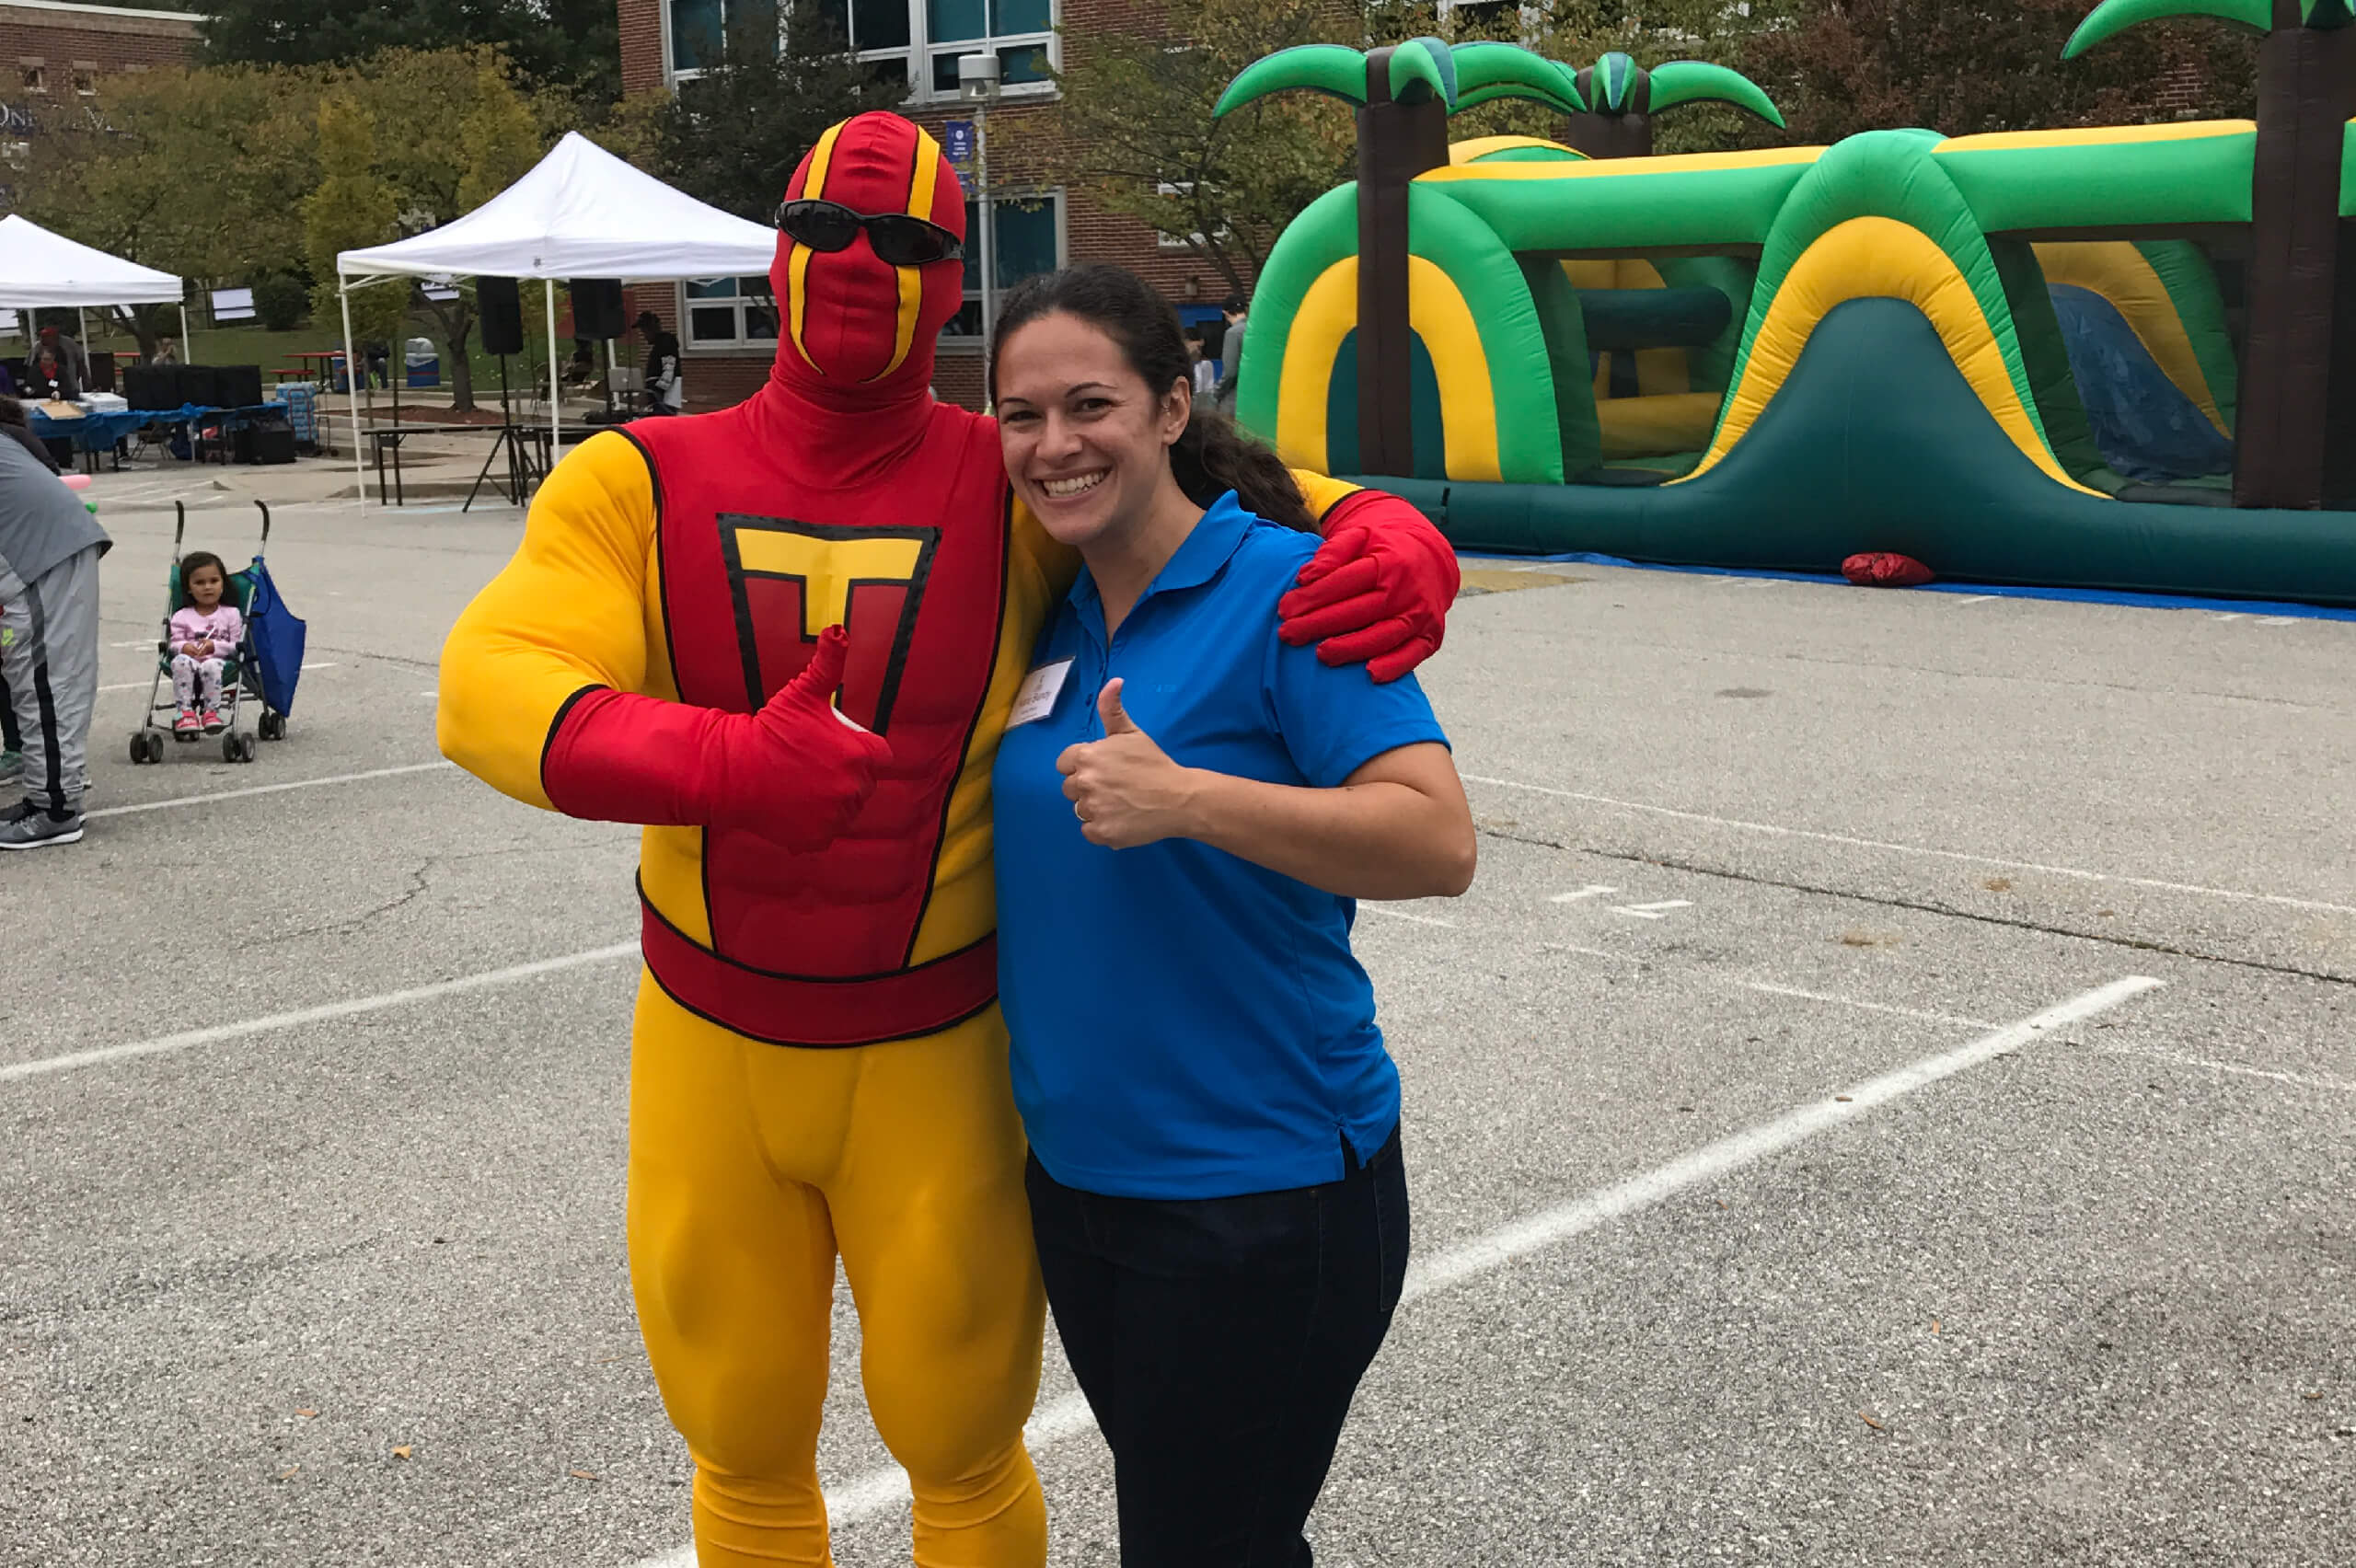 TurboMan poses with a Odenton, Maryland resident at a junk removal event.